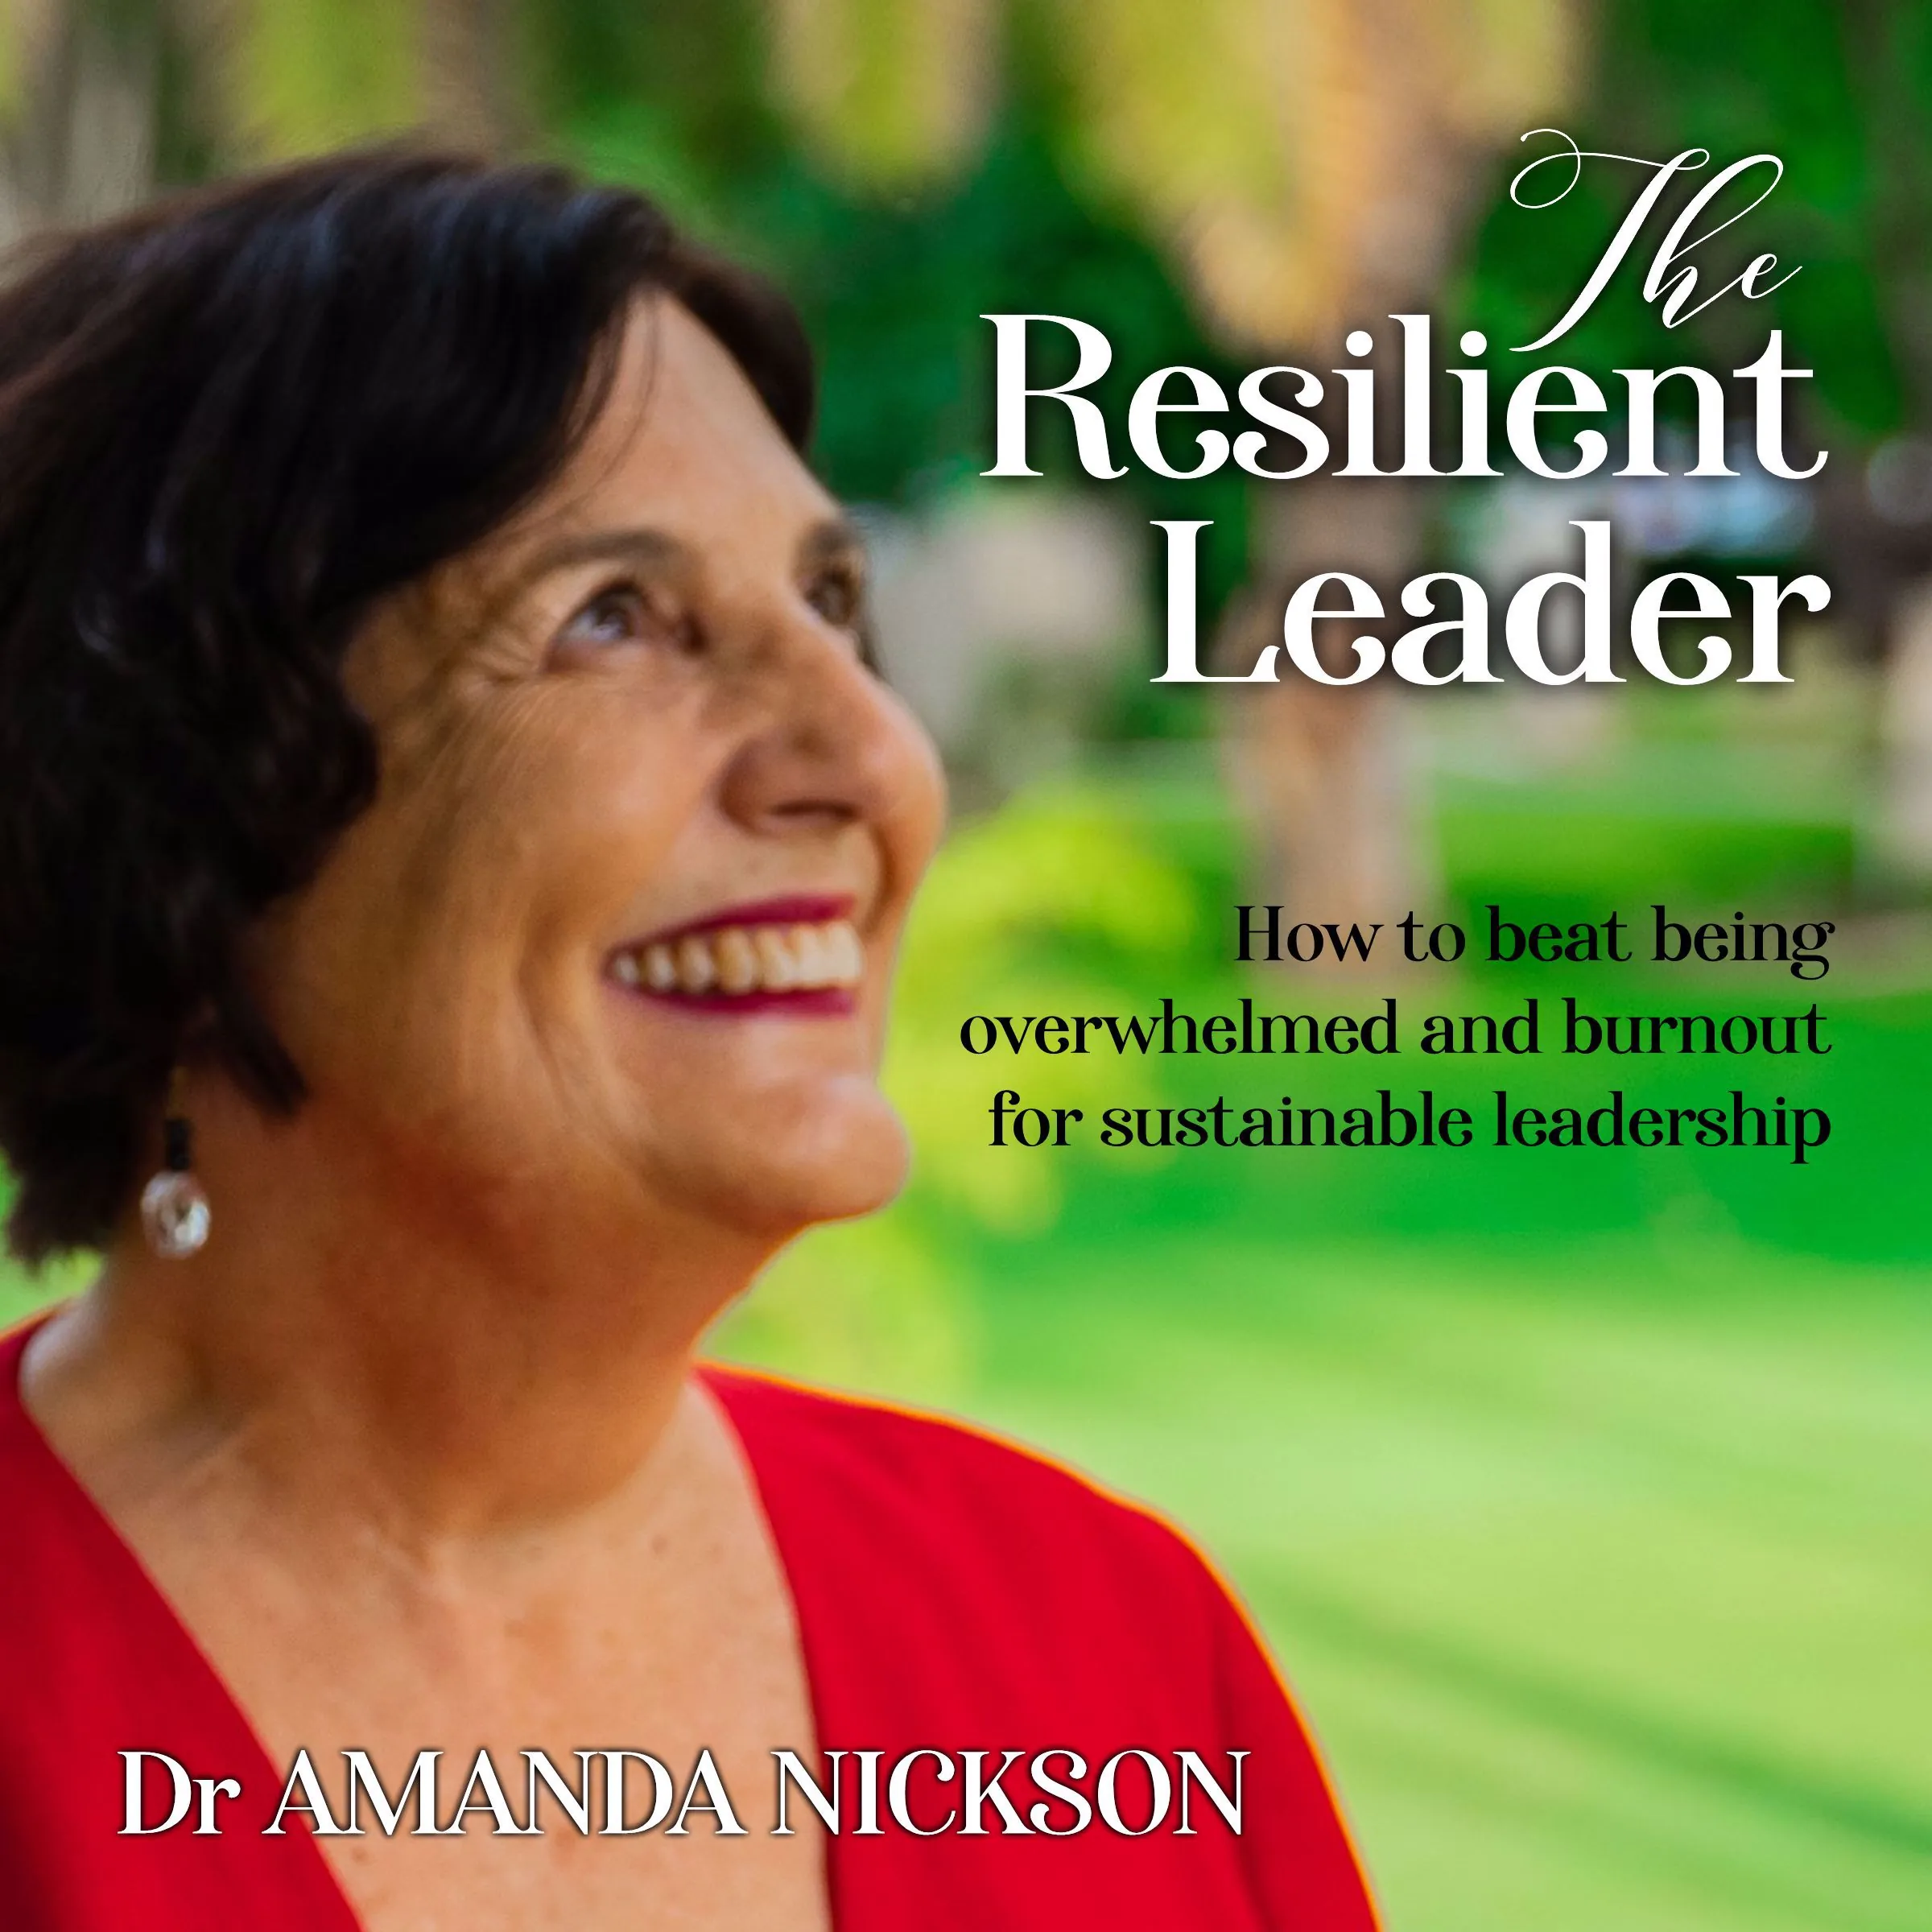 The Resilient Leader Audiobook by Dr. Amanda Nickson